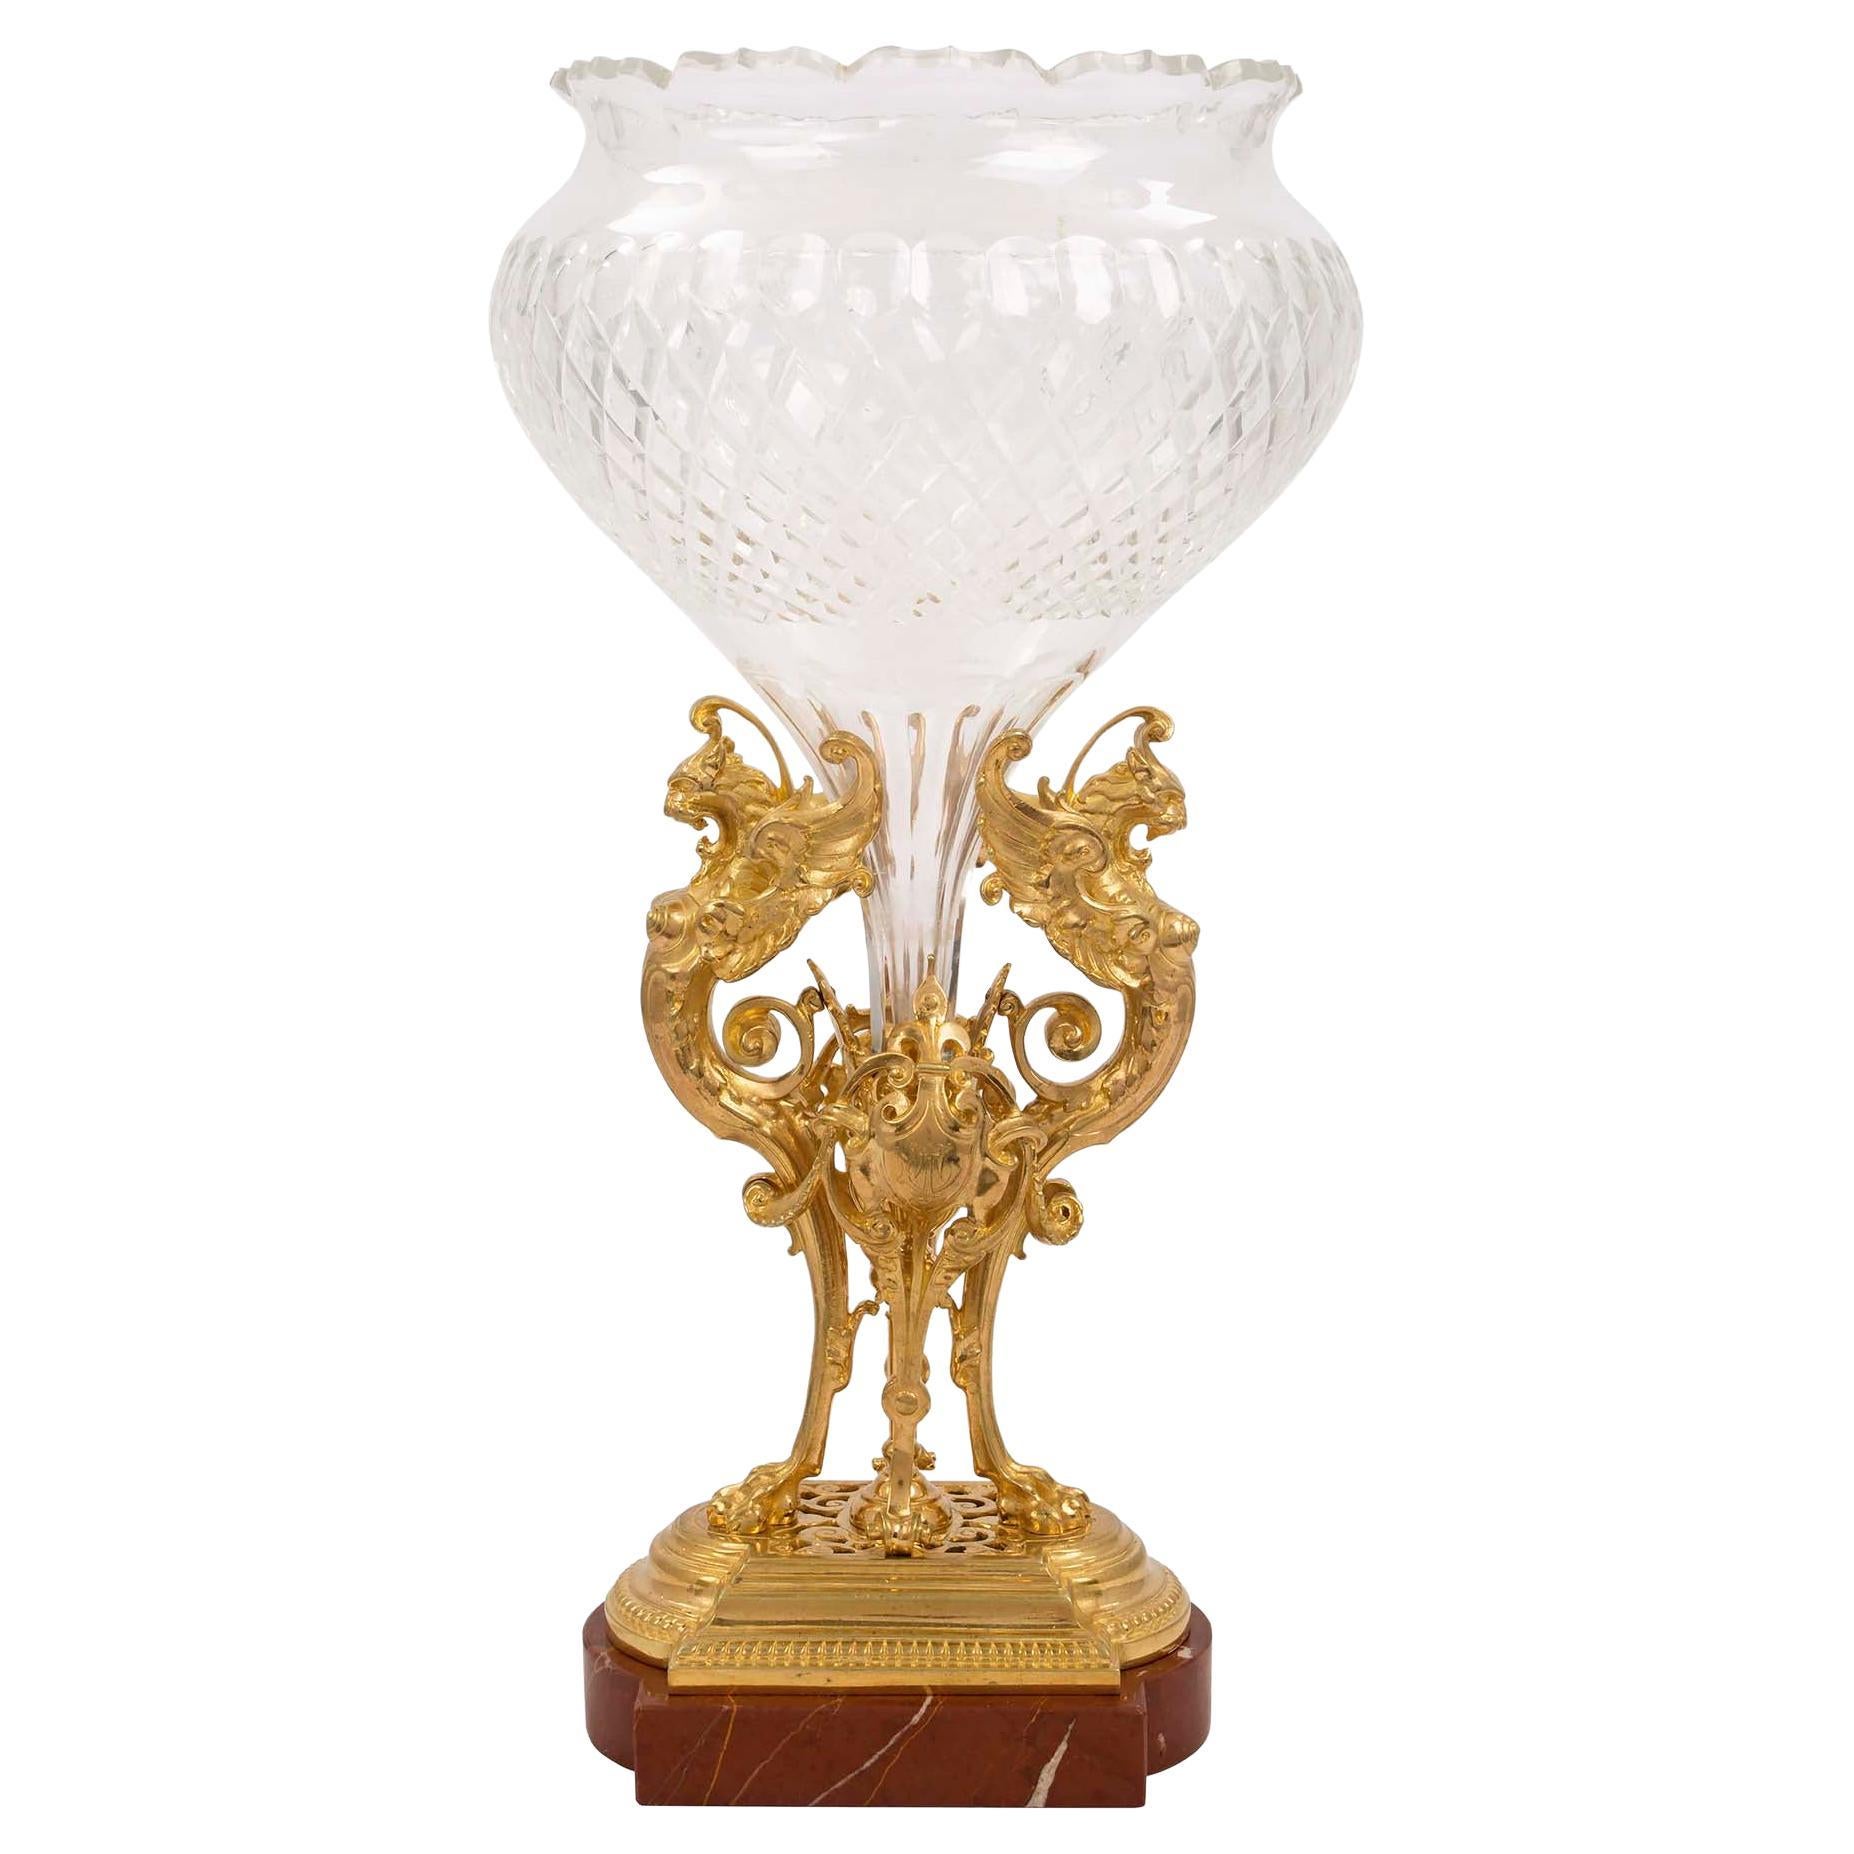 French 19th Century Renaissance Style Marble and Baccarat Crystal Centerpiece